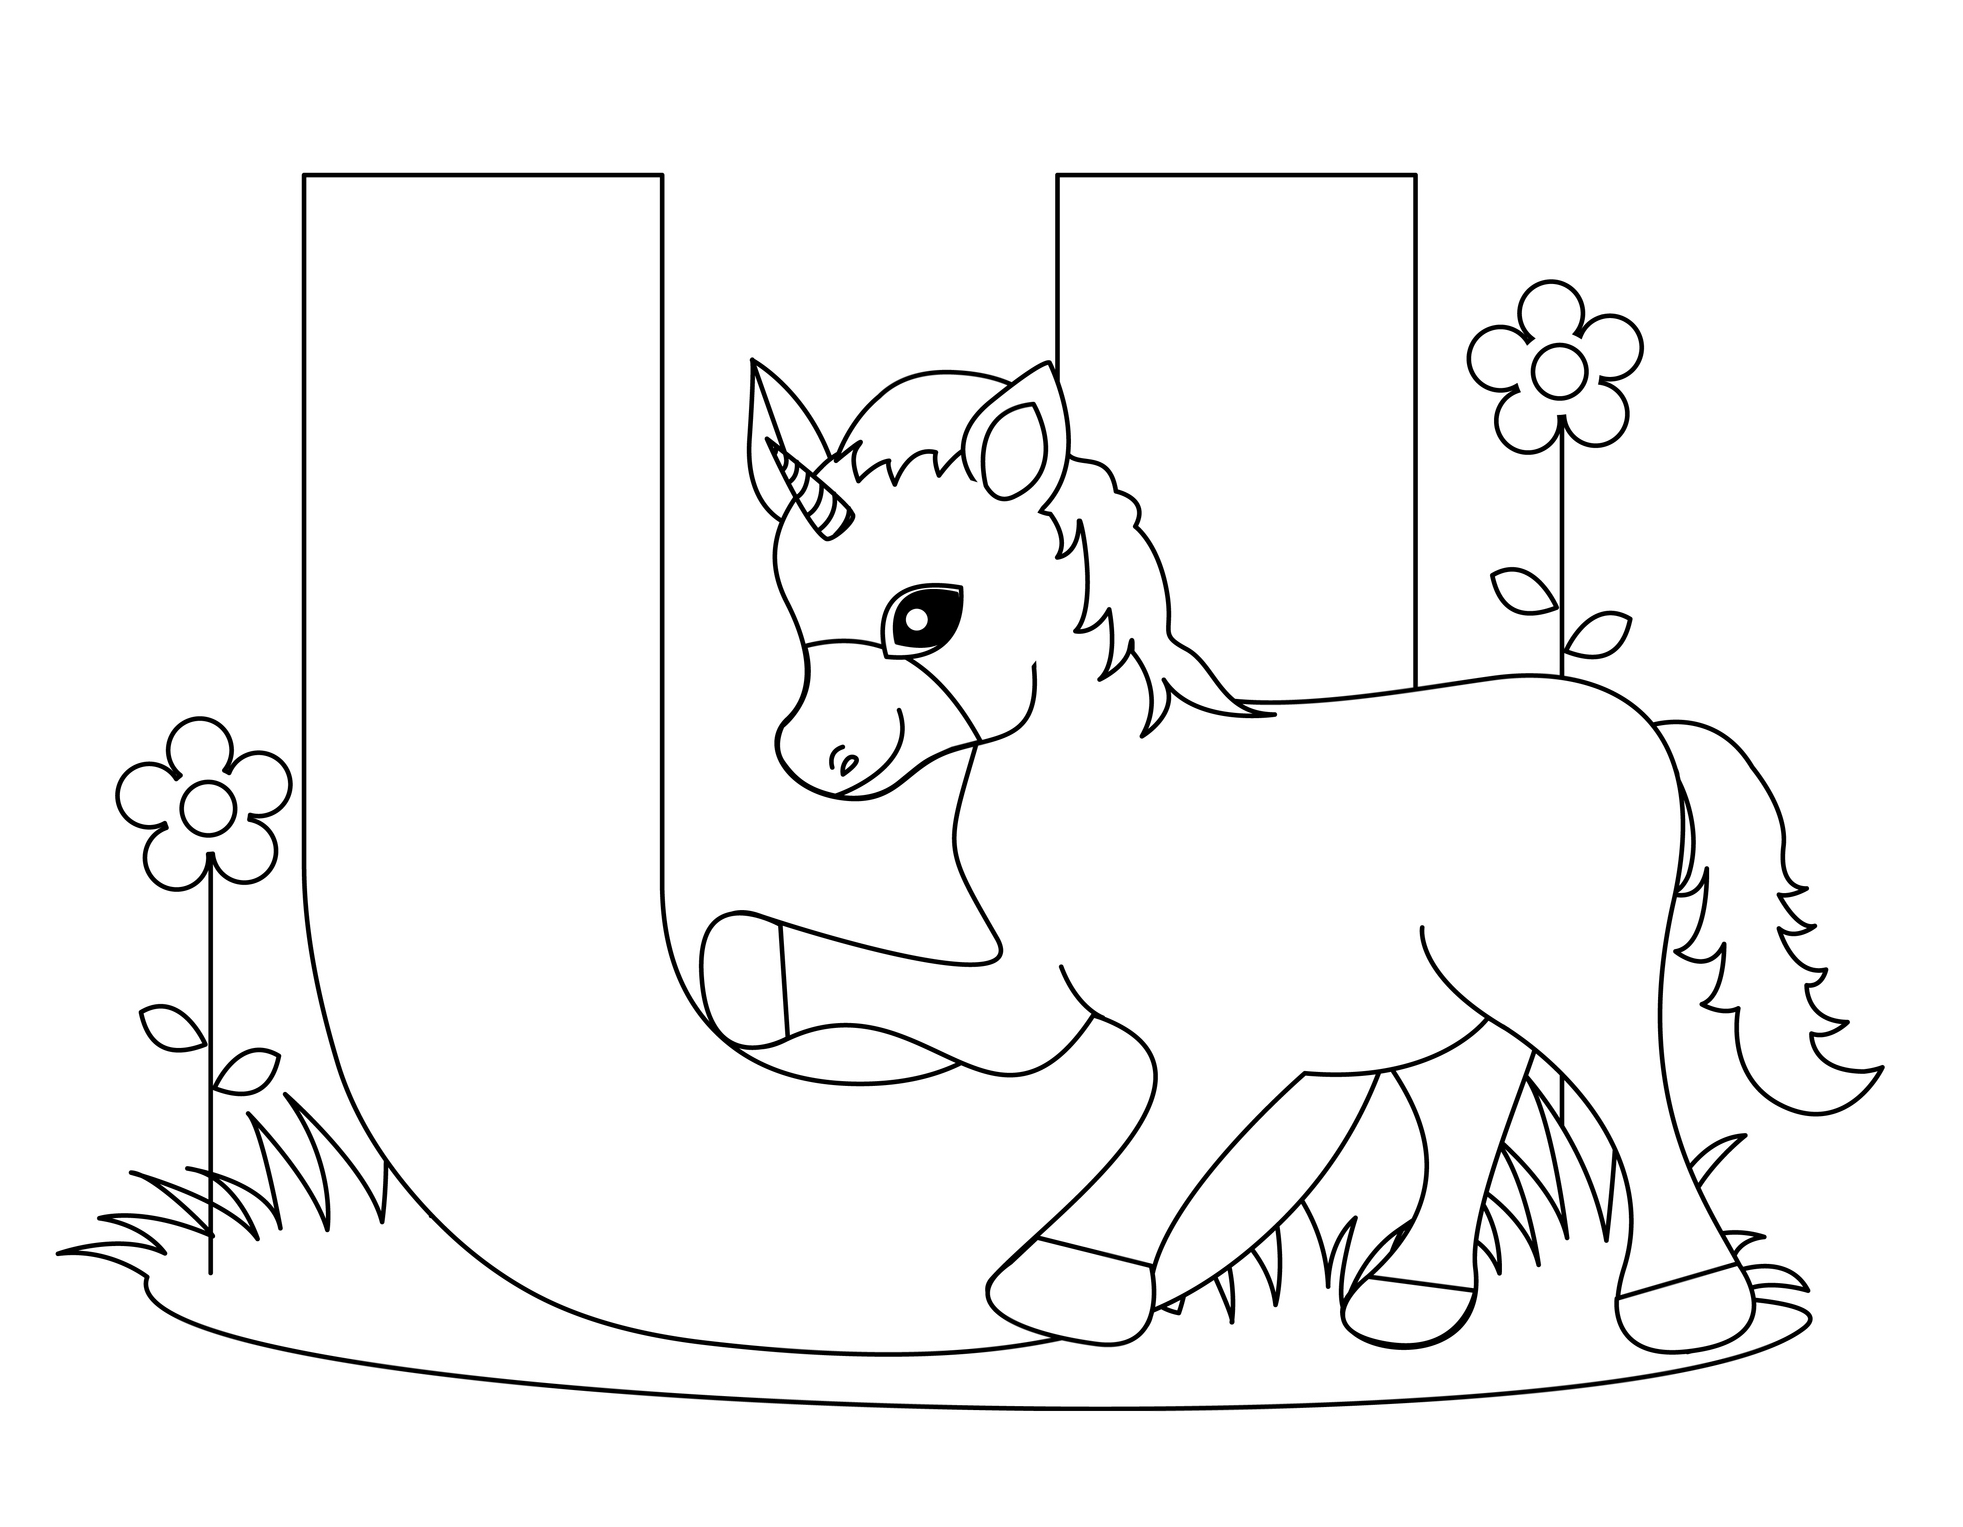 Animal Alphabet Coloring Pages at GetColorings.com | Free ...